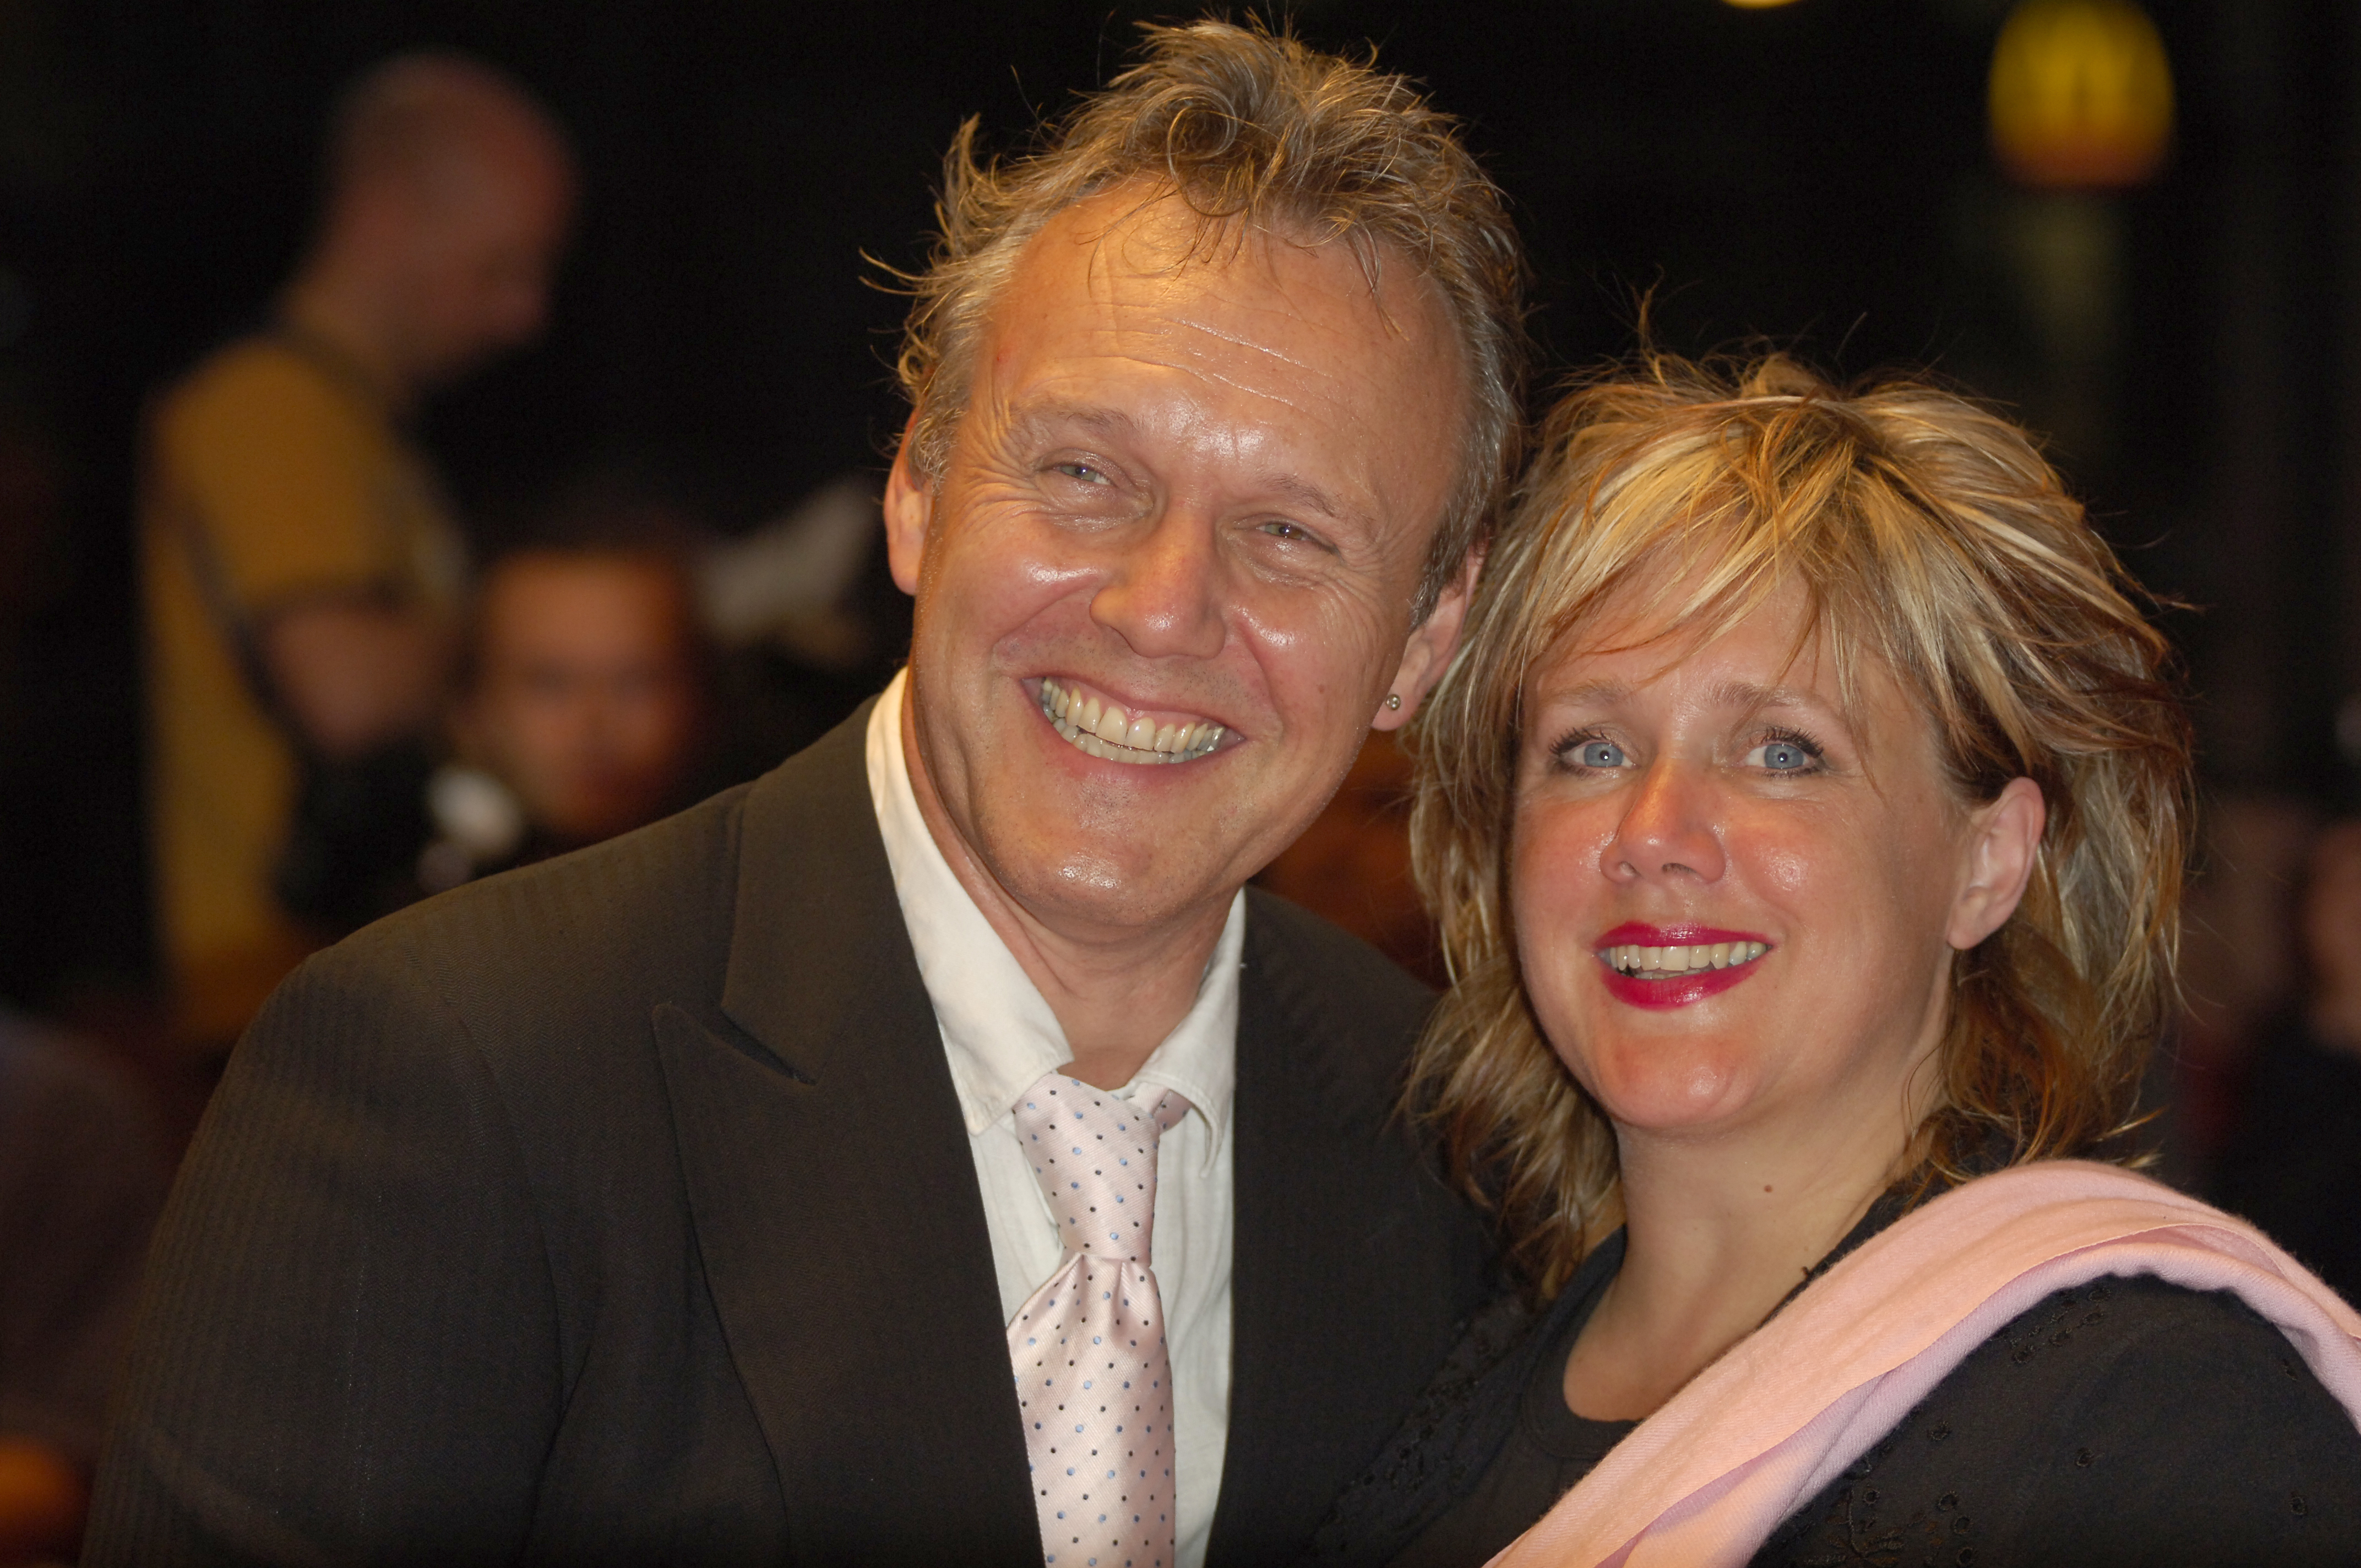 Anthony Head and Sarah Fisher at the Odeon West End in aid of Breakthrough Breast Cancer on September 21, 2006. | Source: Getty Images